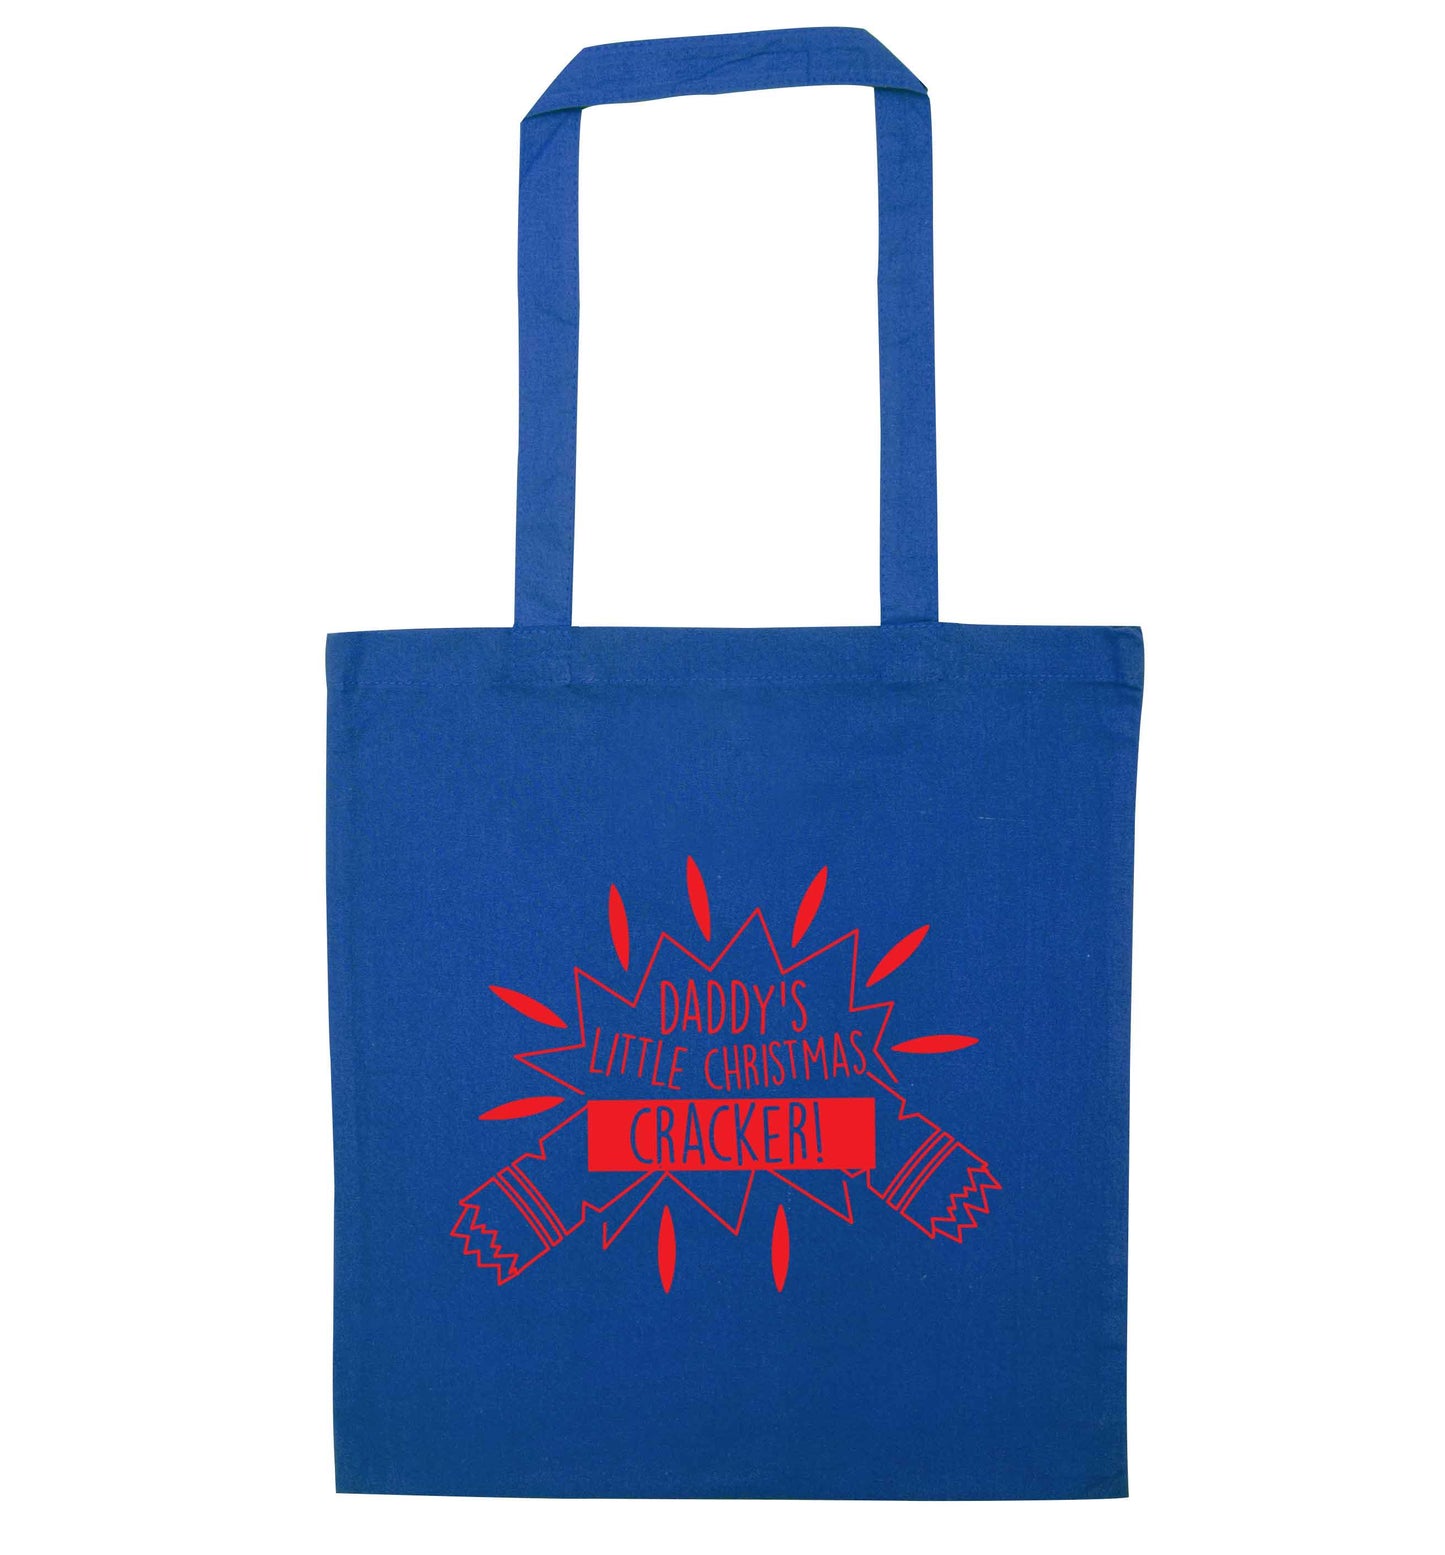 Daddy's little Christmas cracker blue tote bag